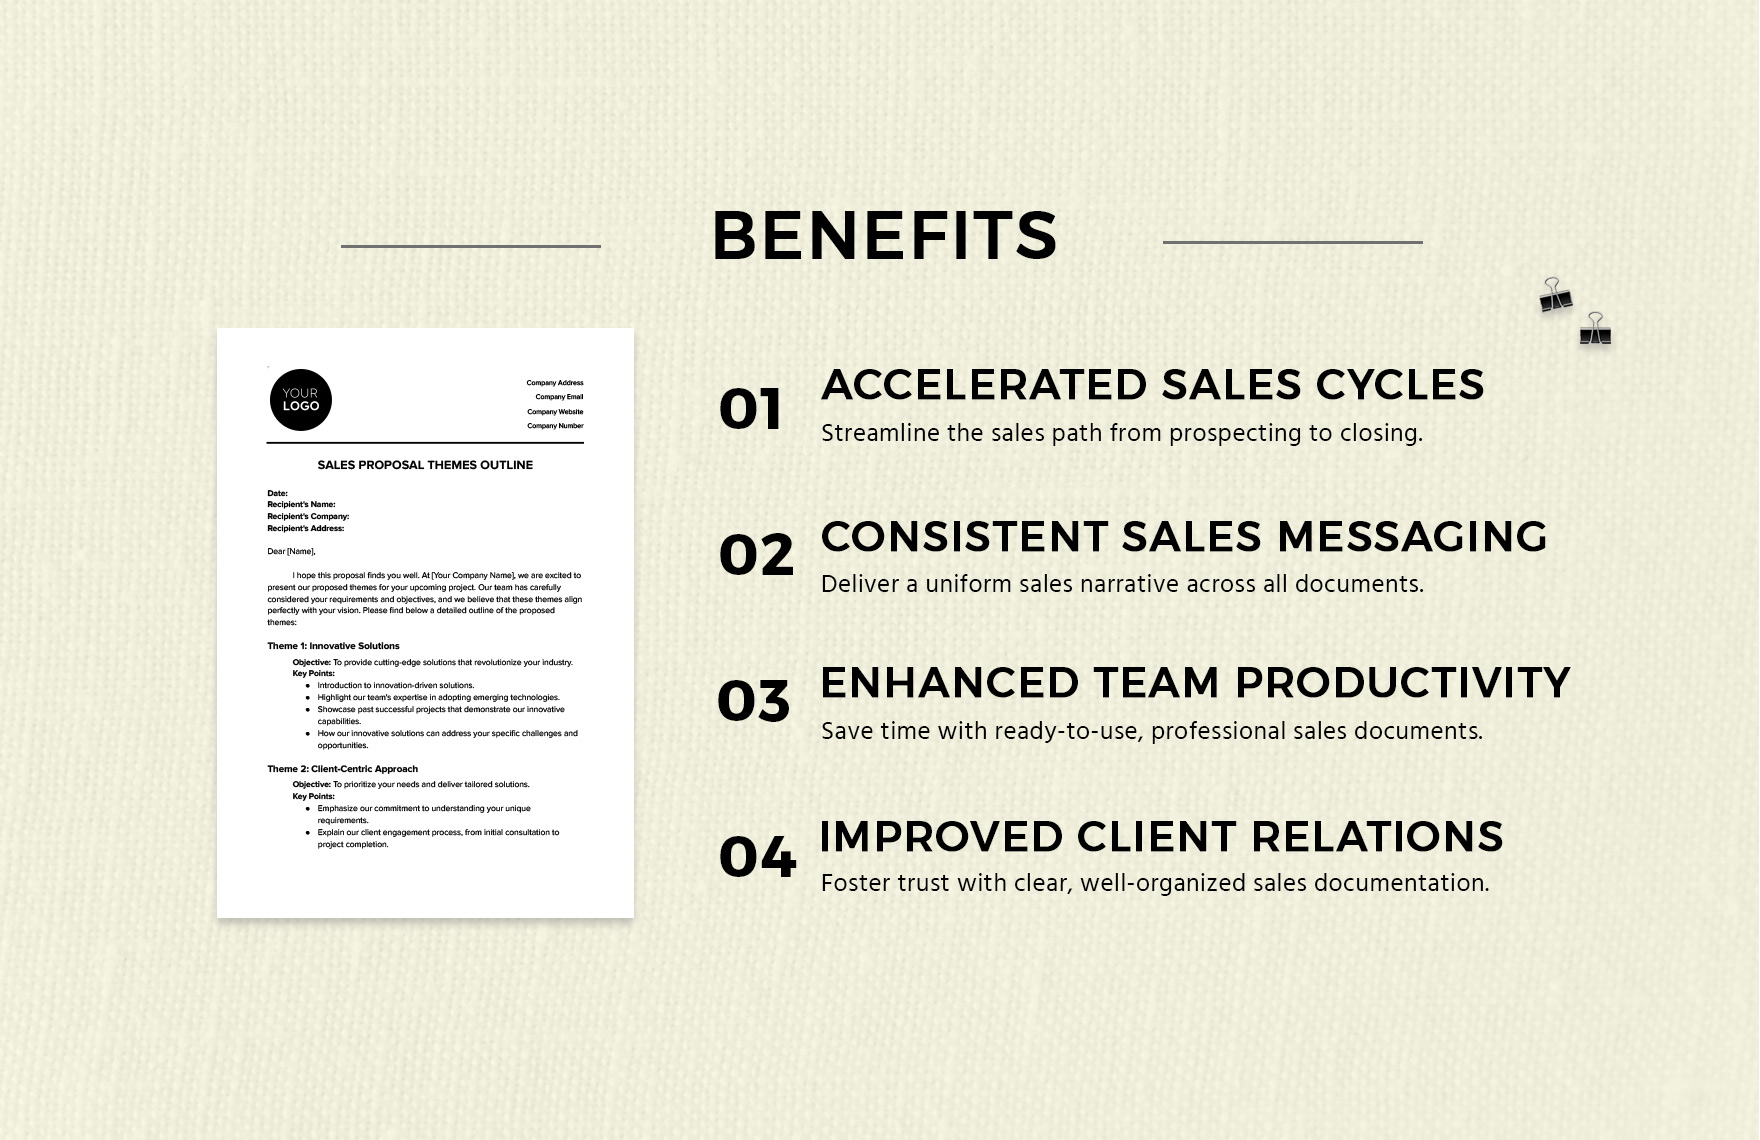 Sales Proposal Themes Outline Template